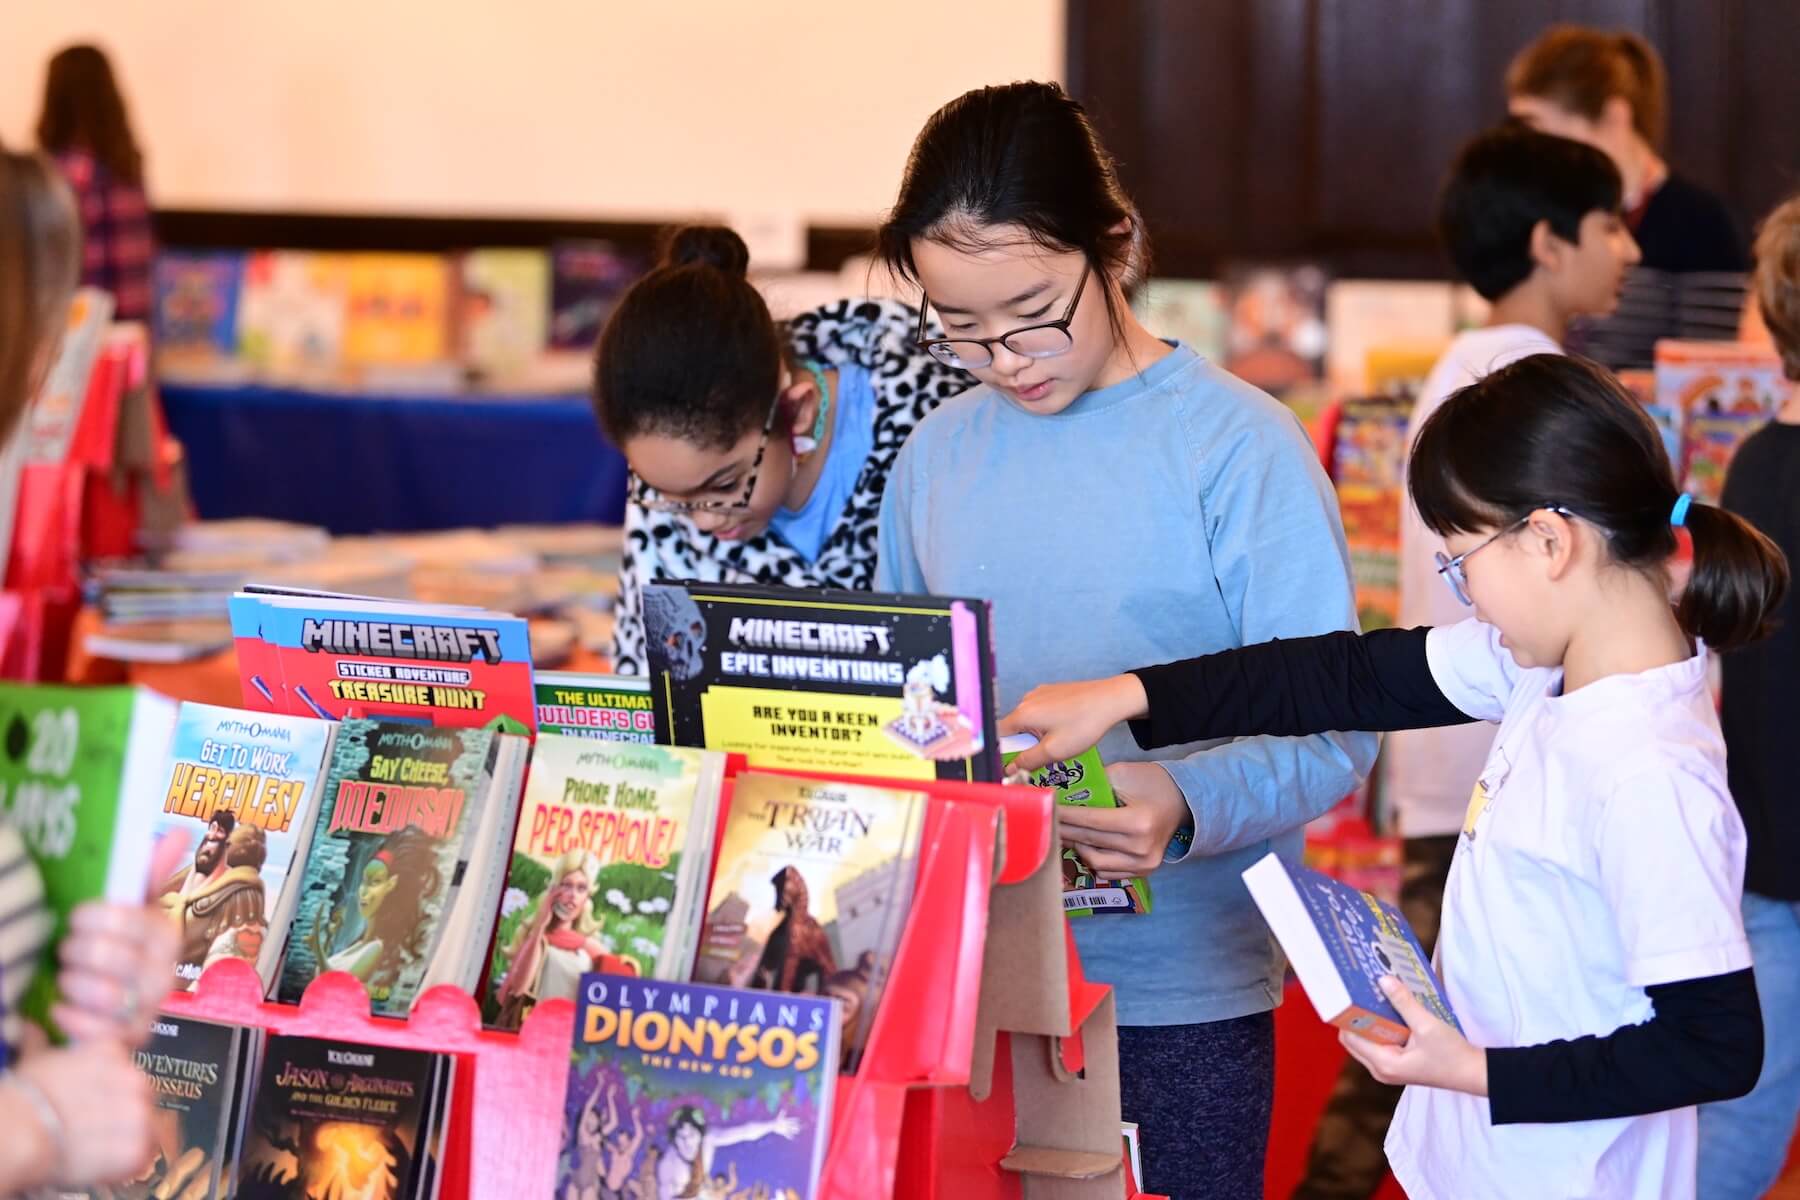 Three Ethical Culture Fieldston School students look at books during Ethical Culture's Book Fair